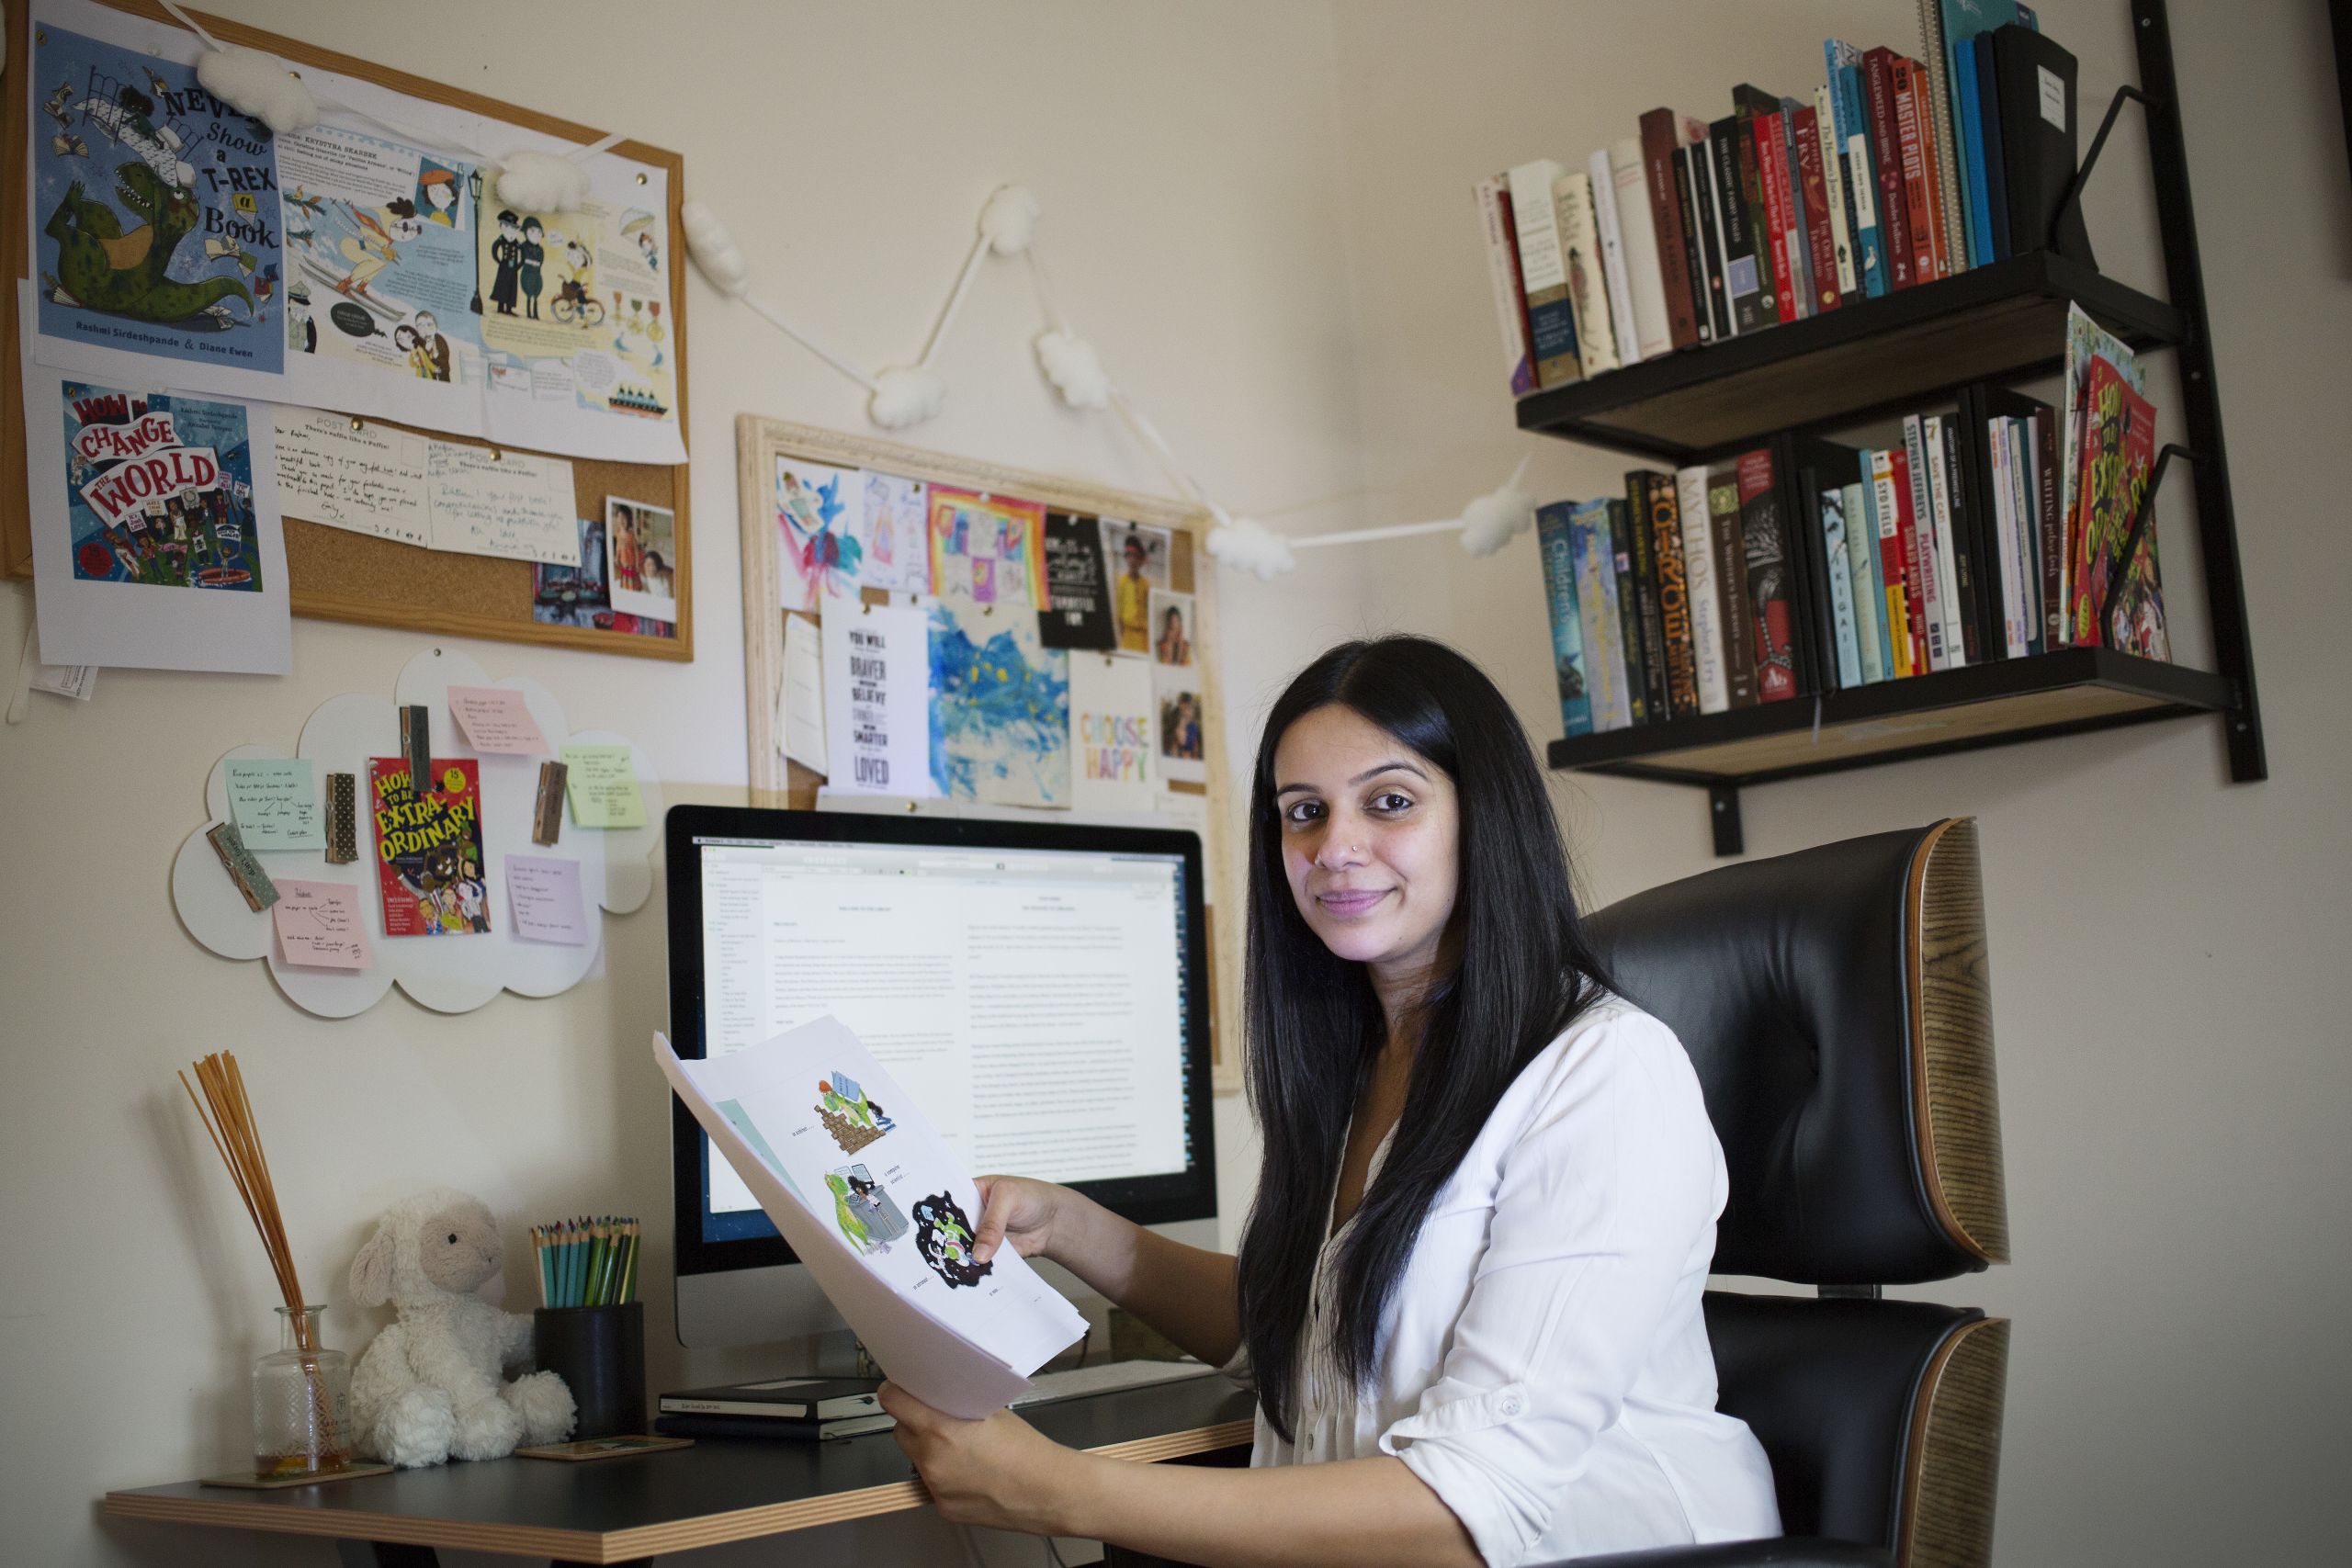 Rashmi at her desk, with books and pictures around her. Rashmi is holding some of the illustrations for her books.